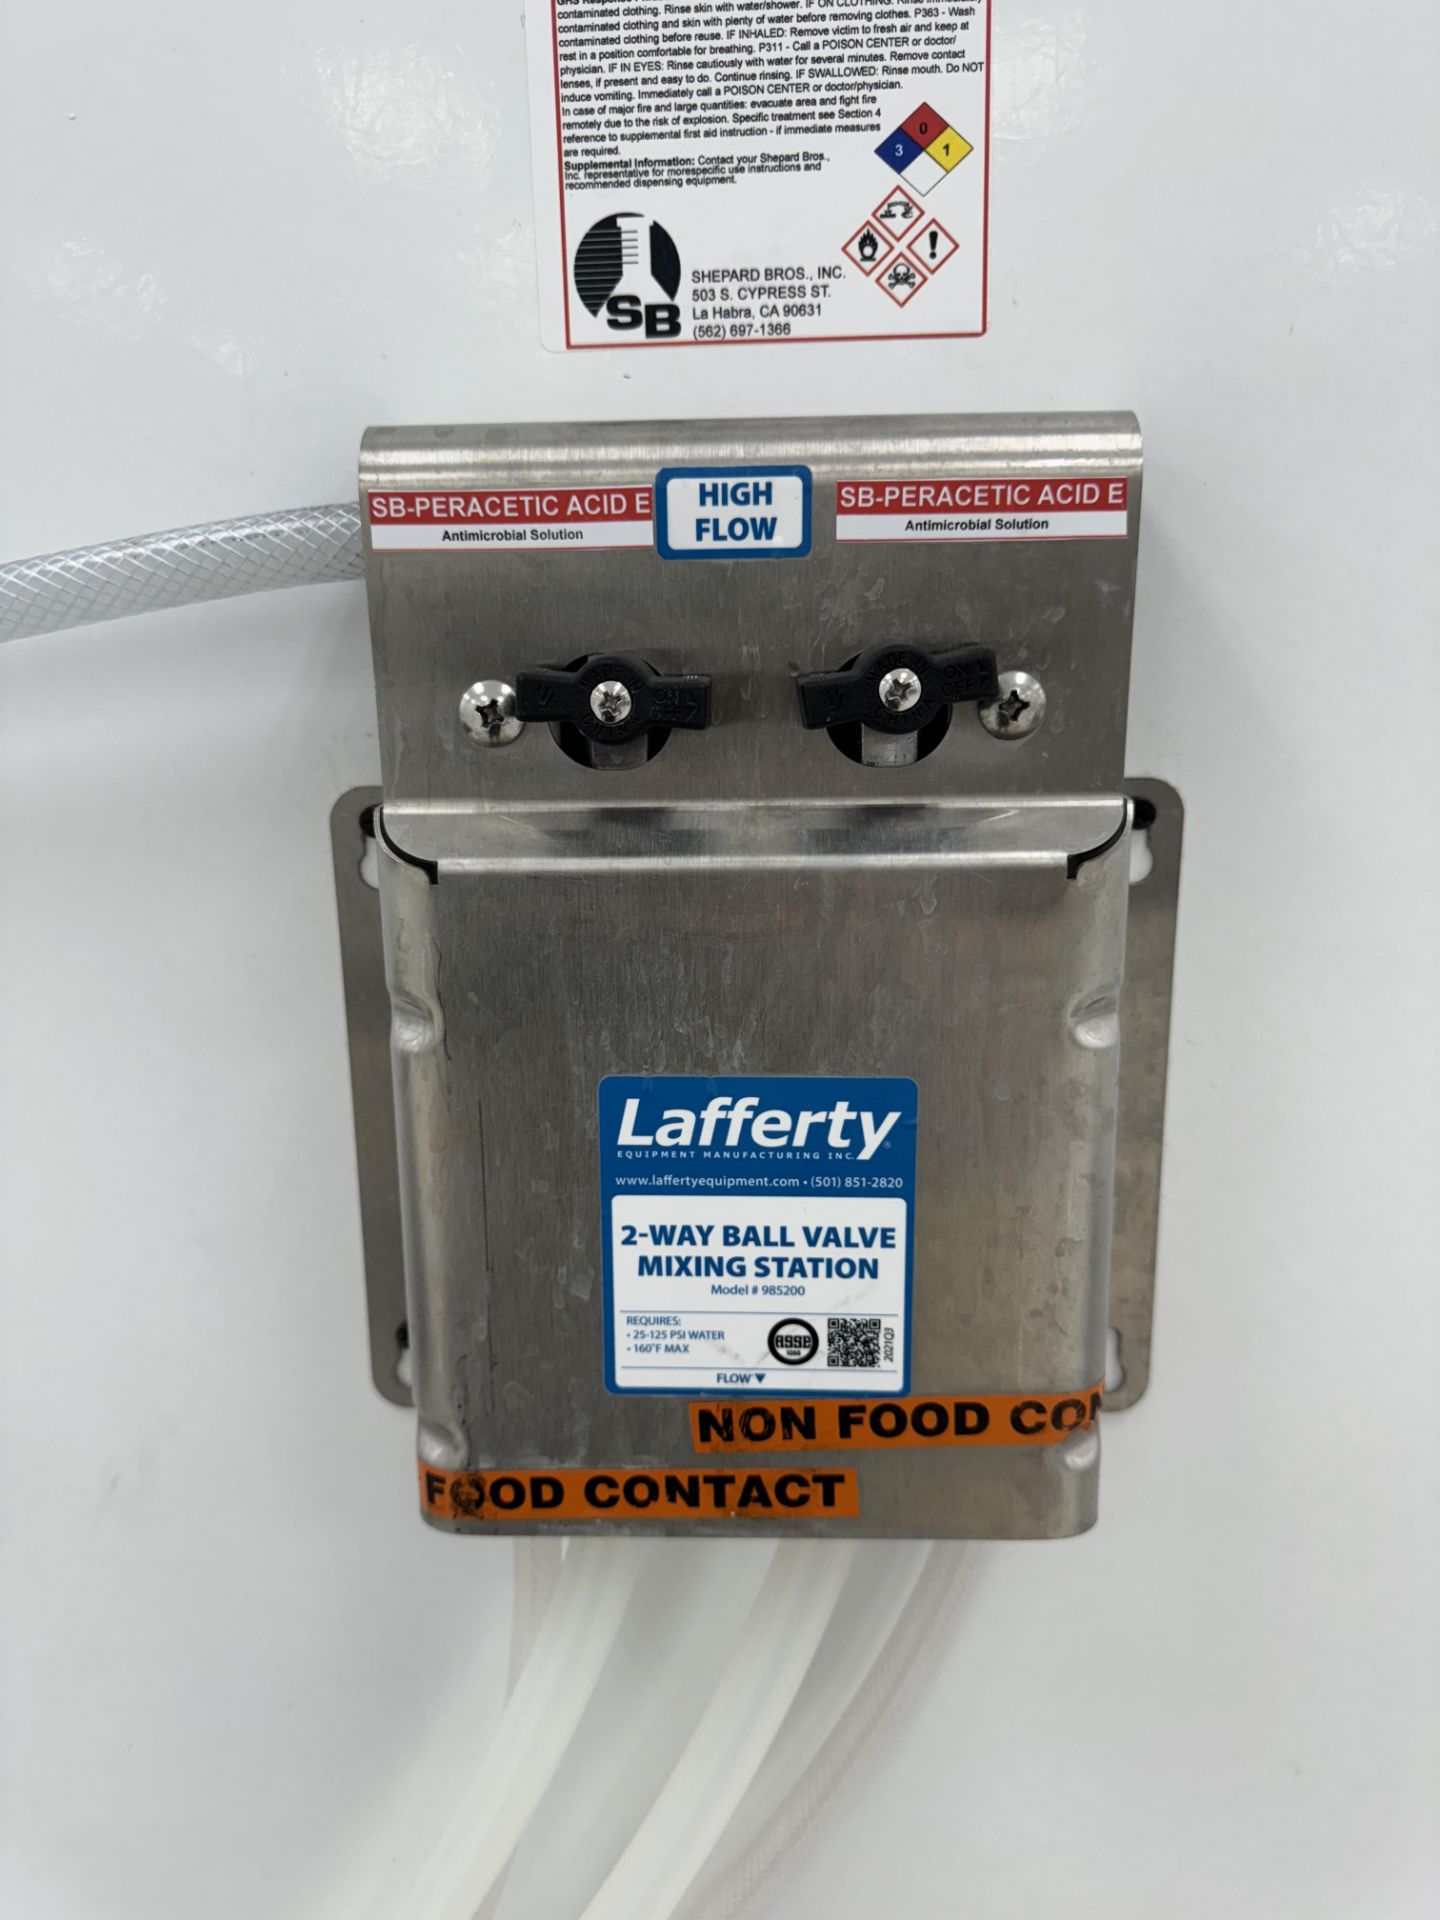 SS 3 well sink with laferty 3-way ball valve mixing station - Image 3 of 3